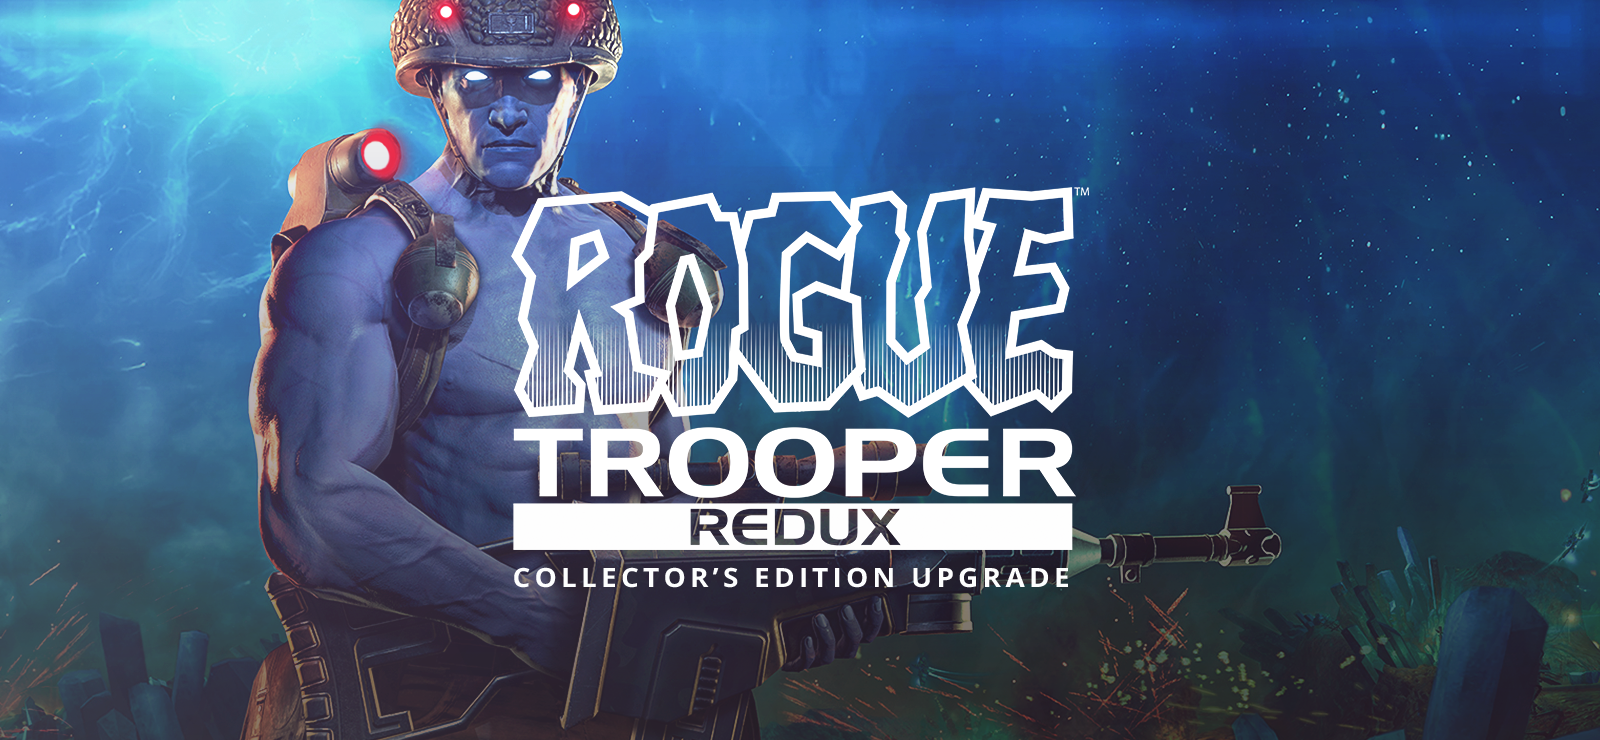 Rogue Trooper Redux Collector's Edition Upgrade